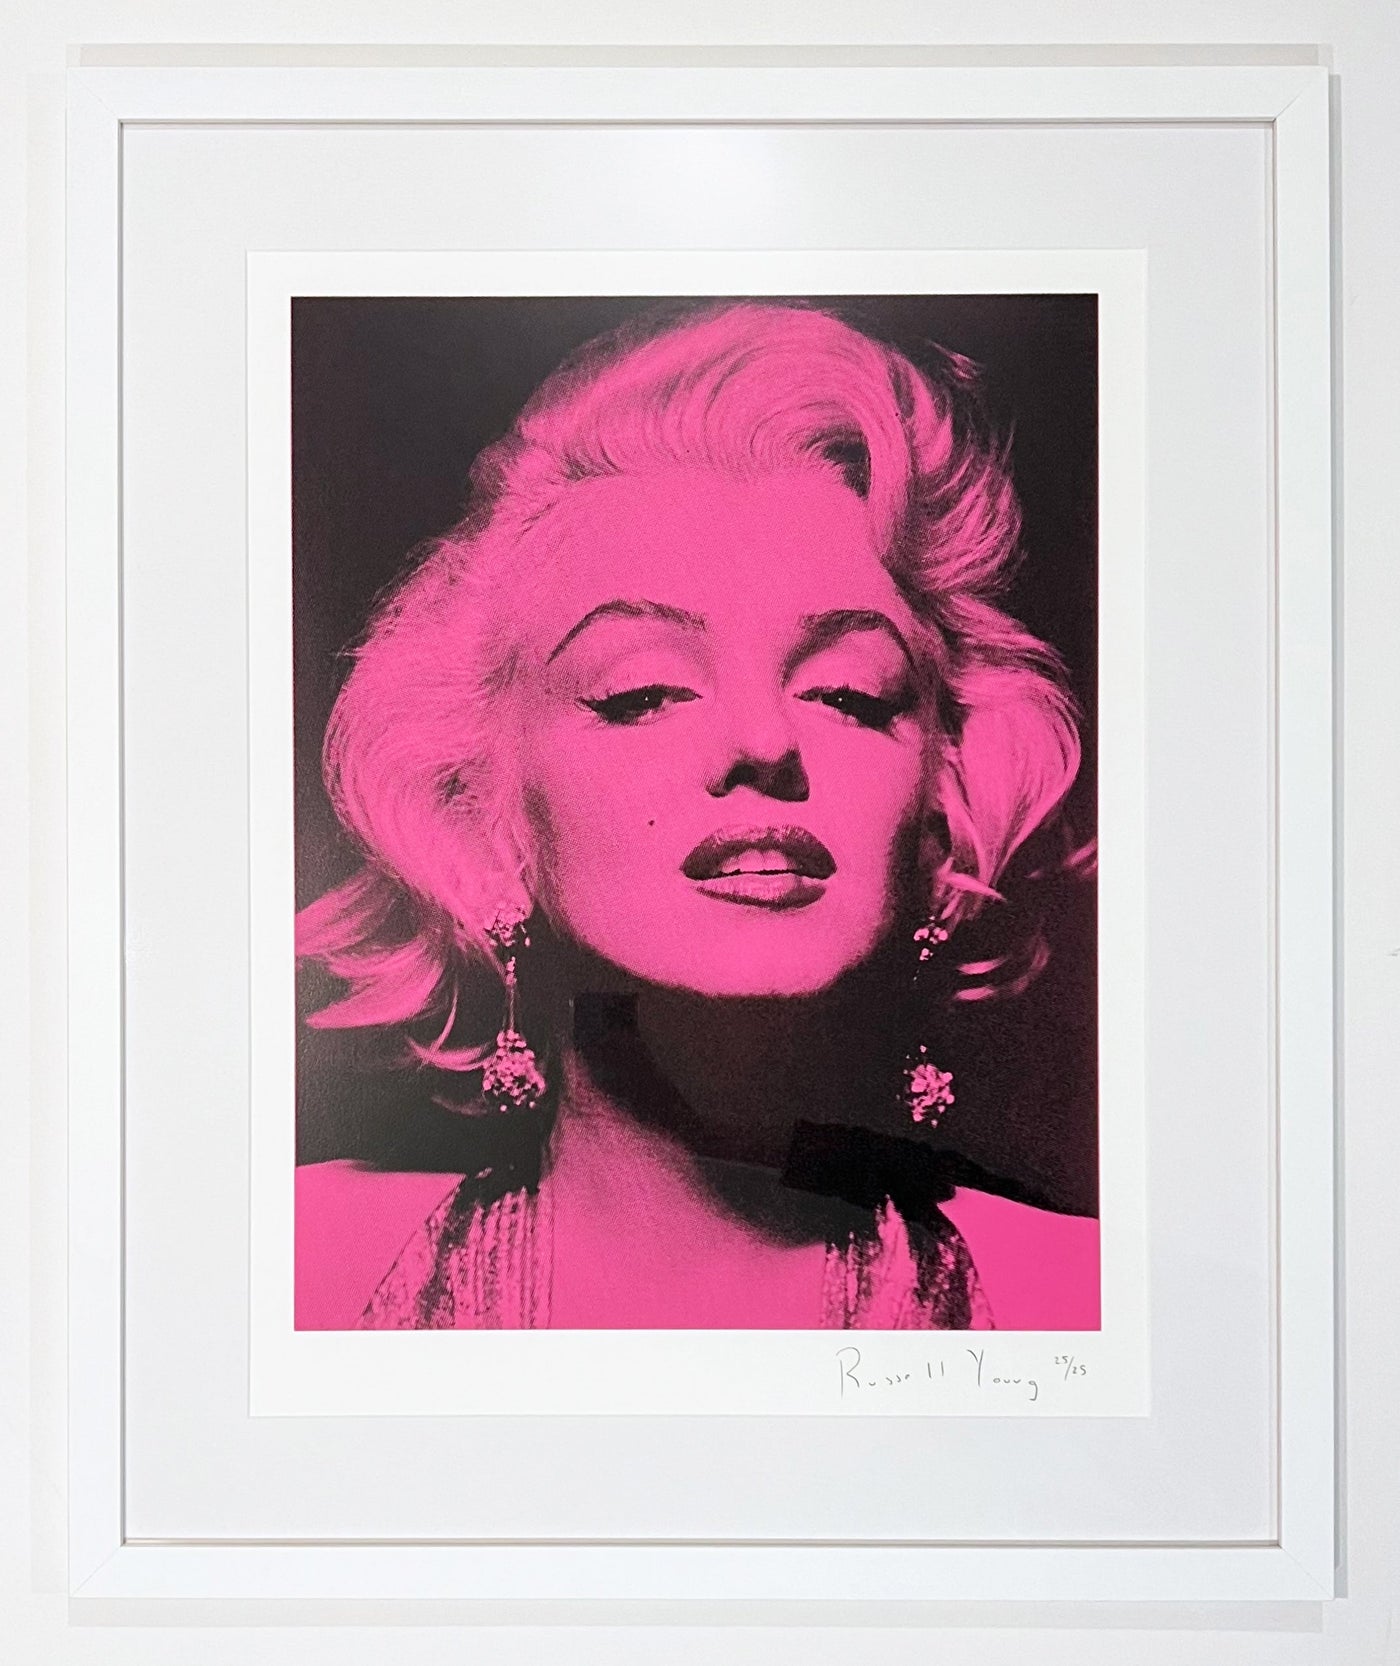 Russell Young Marilyn Portrait (Magenta) 2014